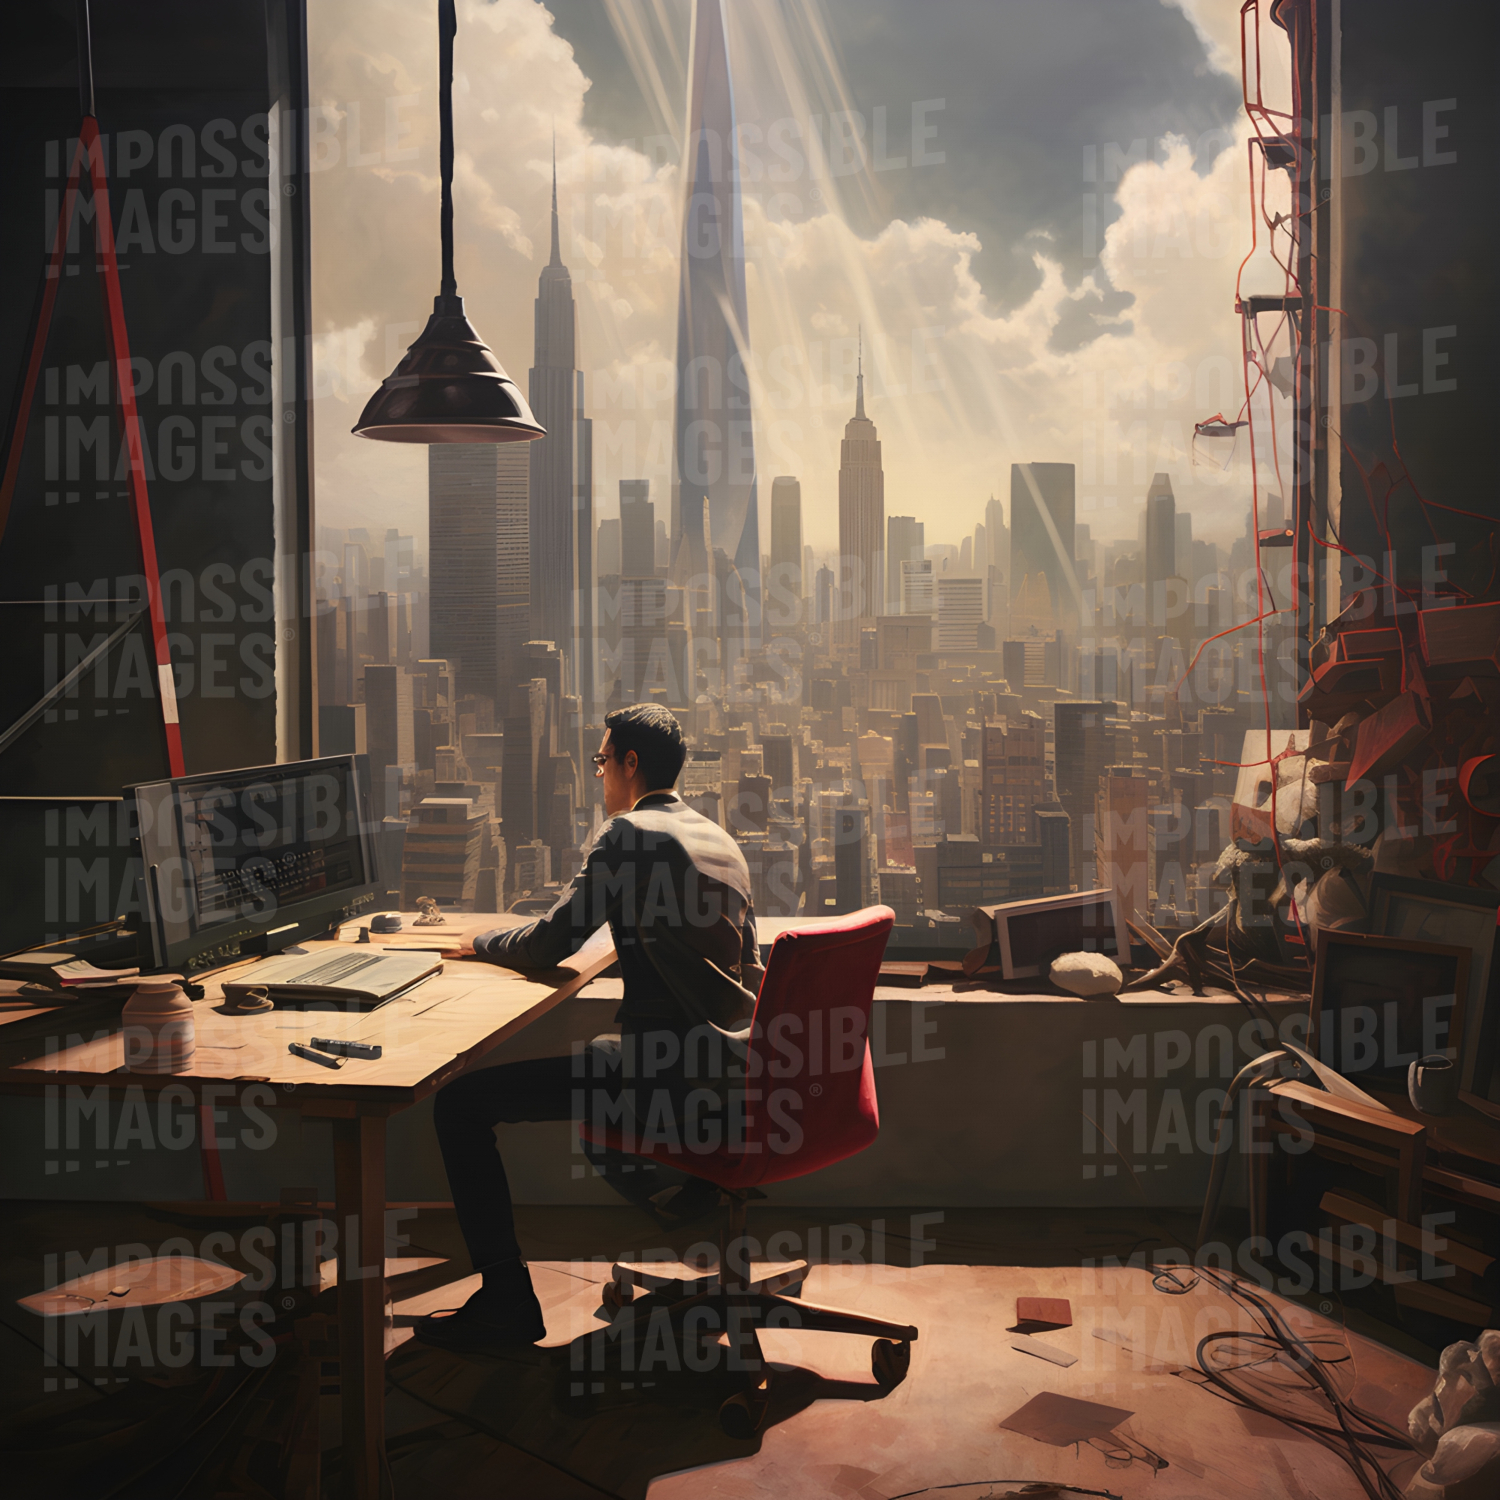 Retro-futurist painting of an office worker sat at a computer desk in front of a huge window overlooking a sci-fi city skyline - 